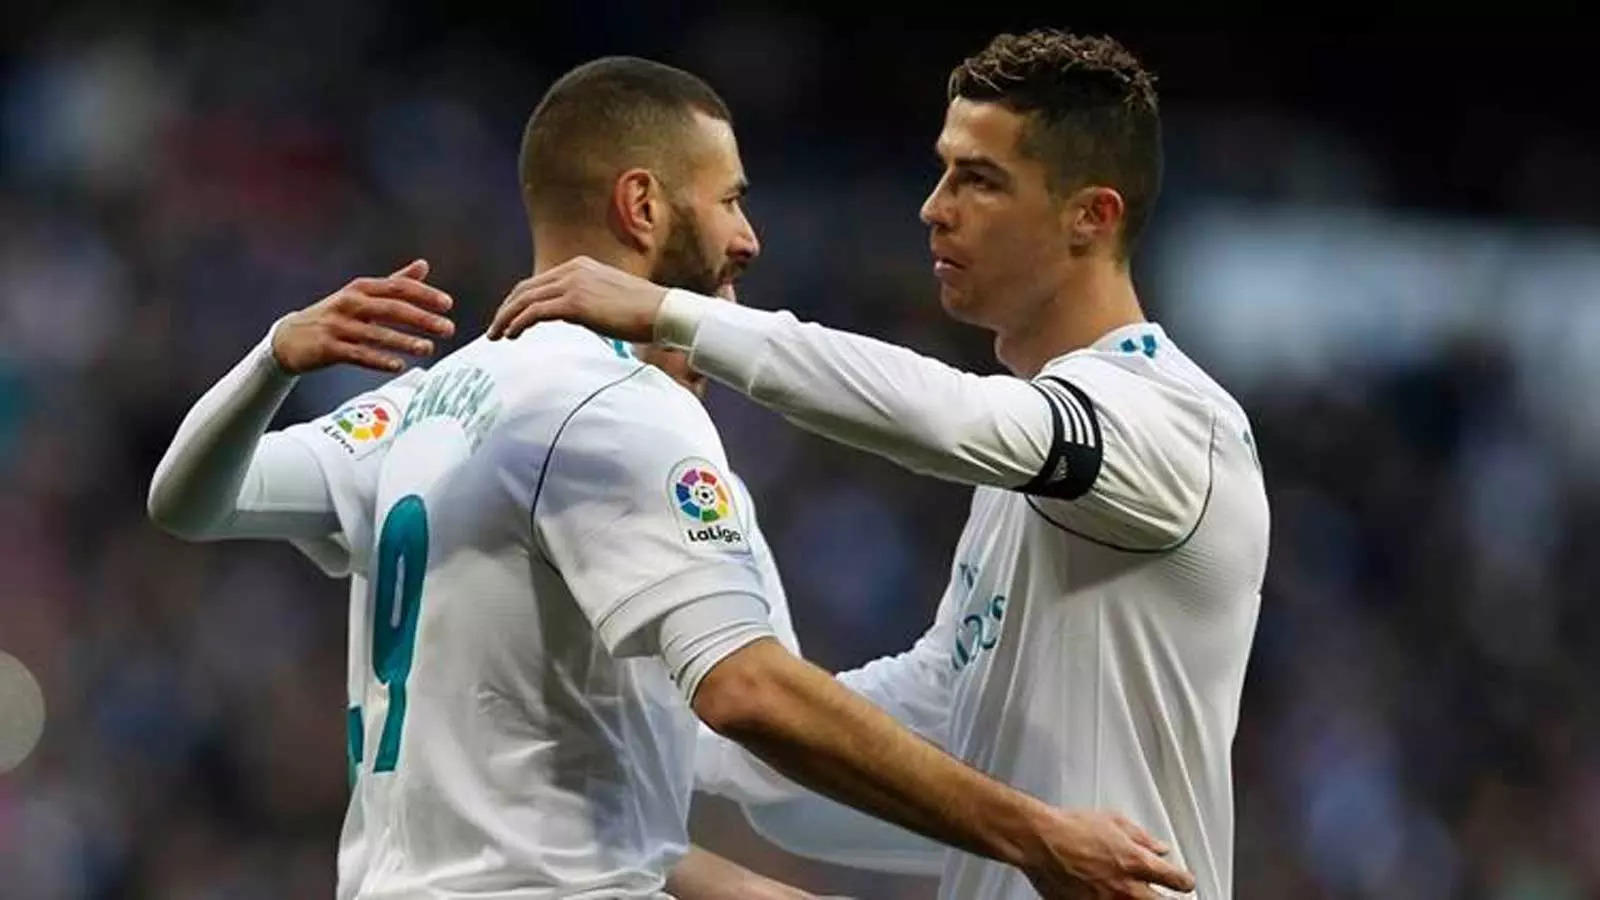 Karim Benzema had made some personal sacrifices when he played alongside Cristiano Ronaldo at Real Madrid